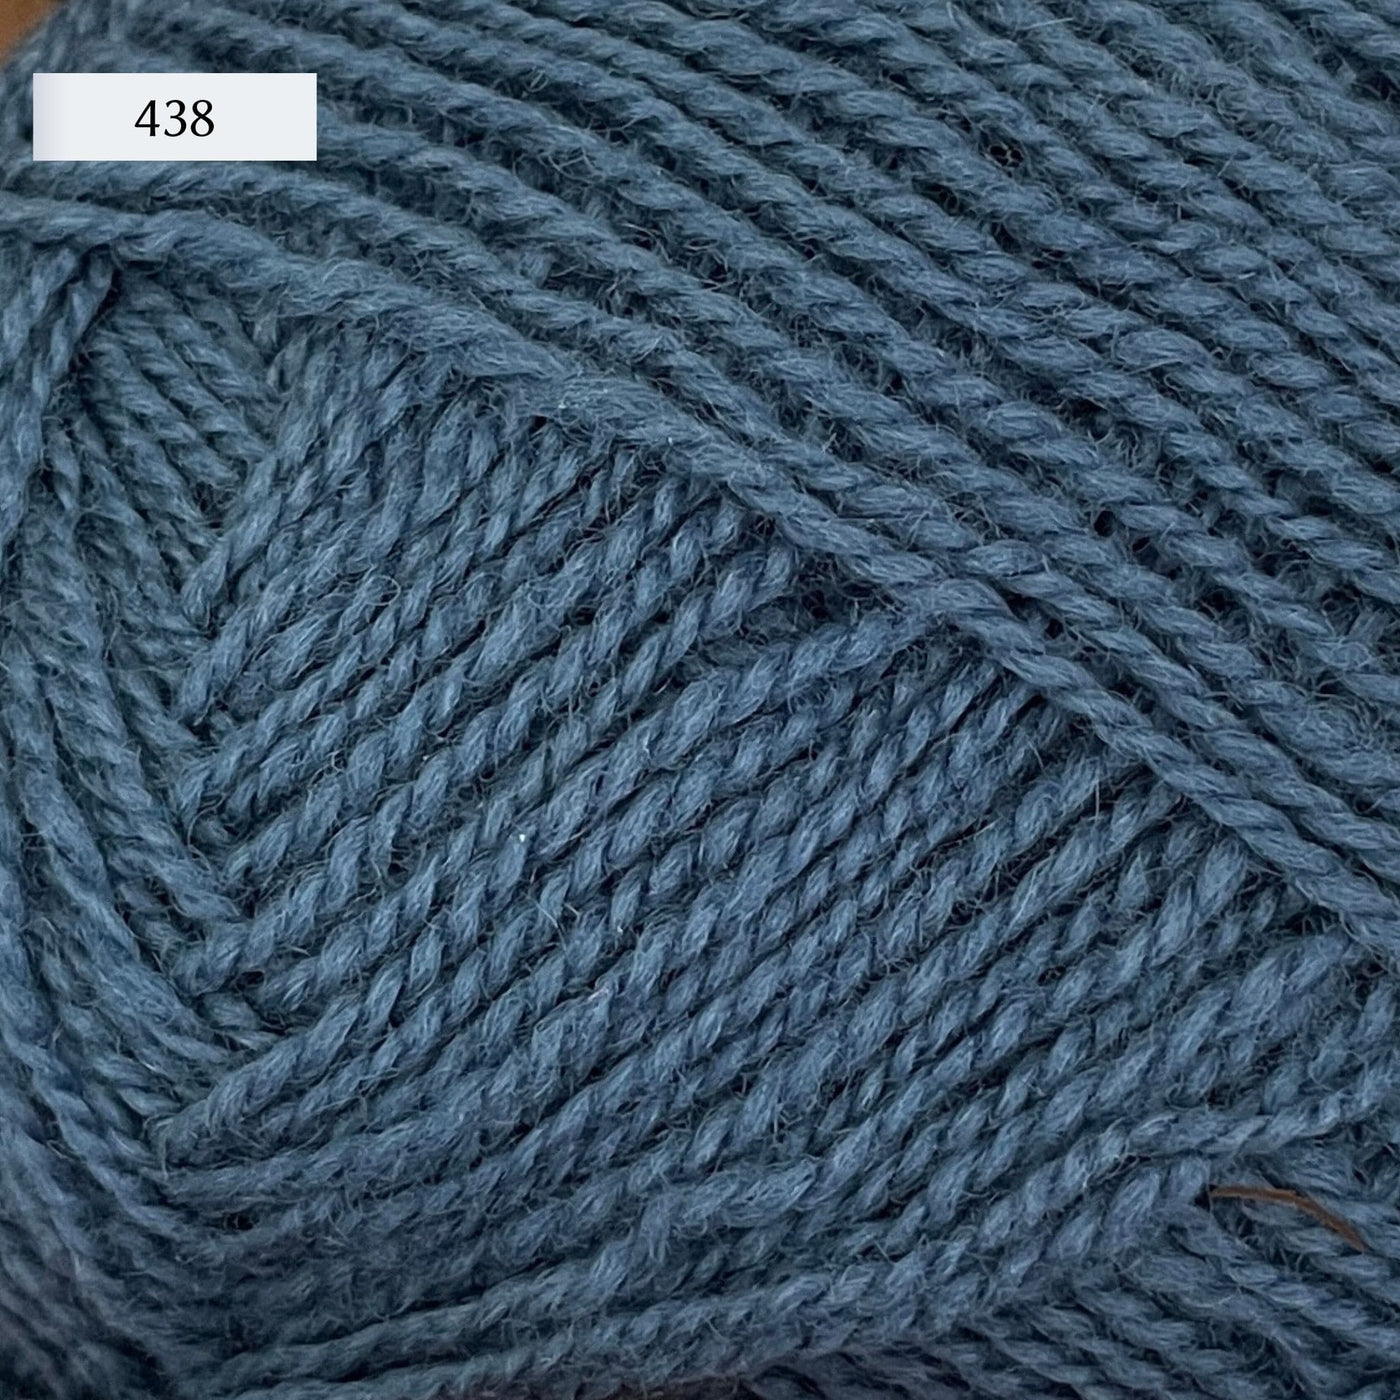 Rauma Gammelserie 2ply wool yarn, fingering weight, in color 438, a cool deep petrol blue